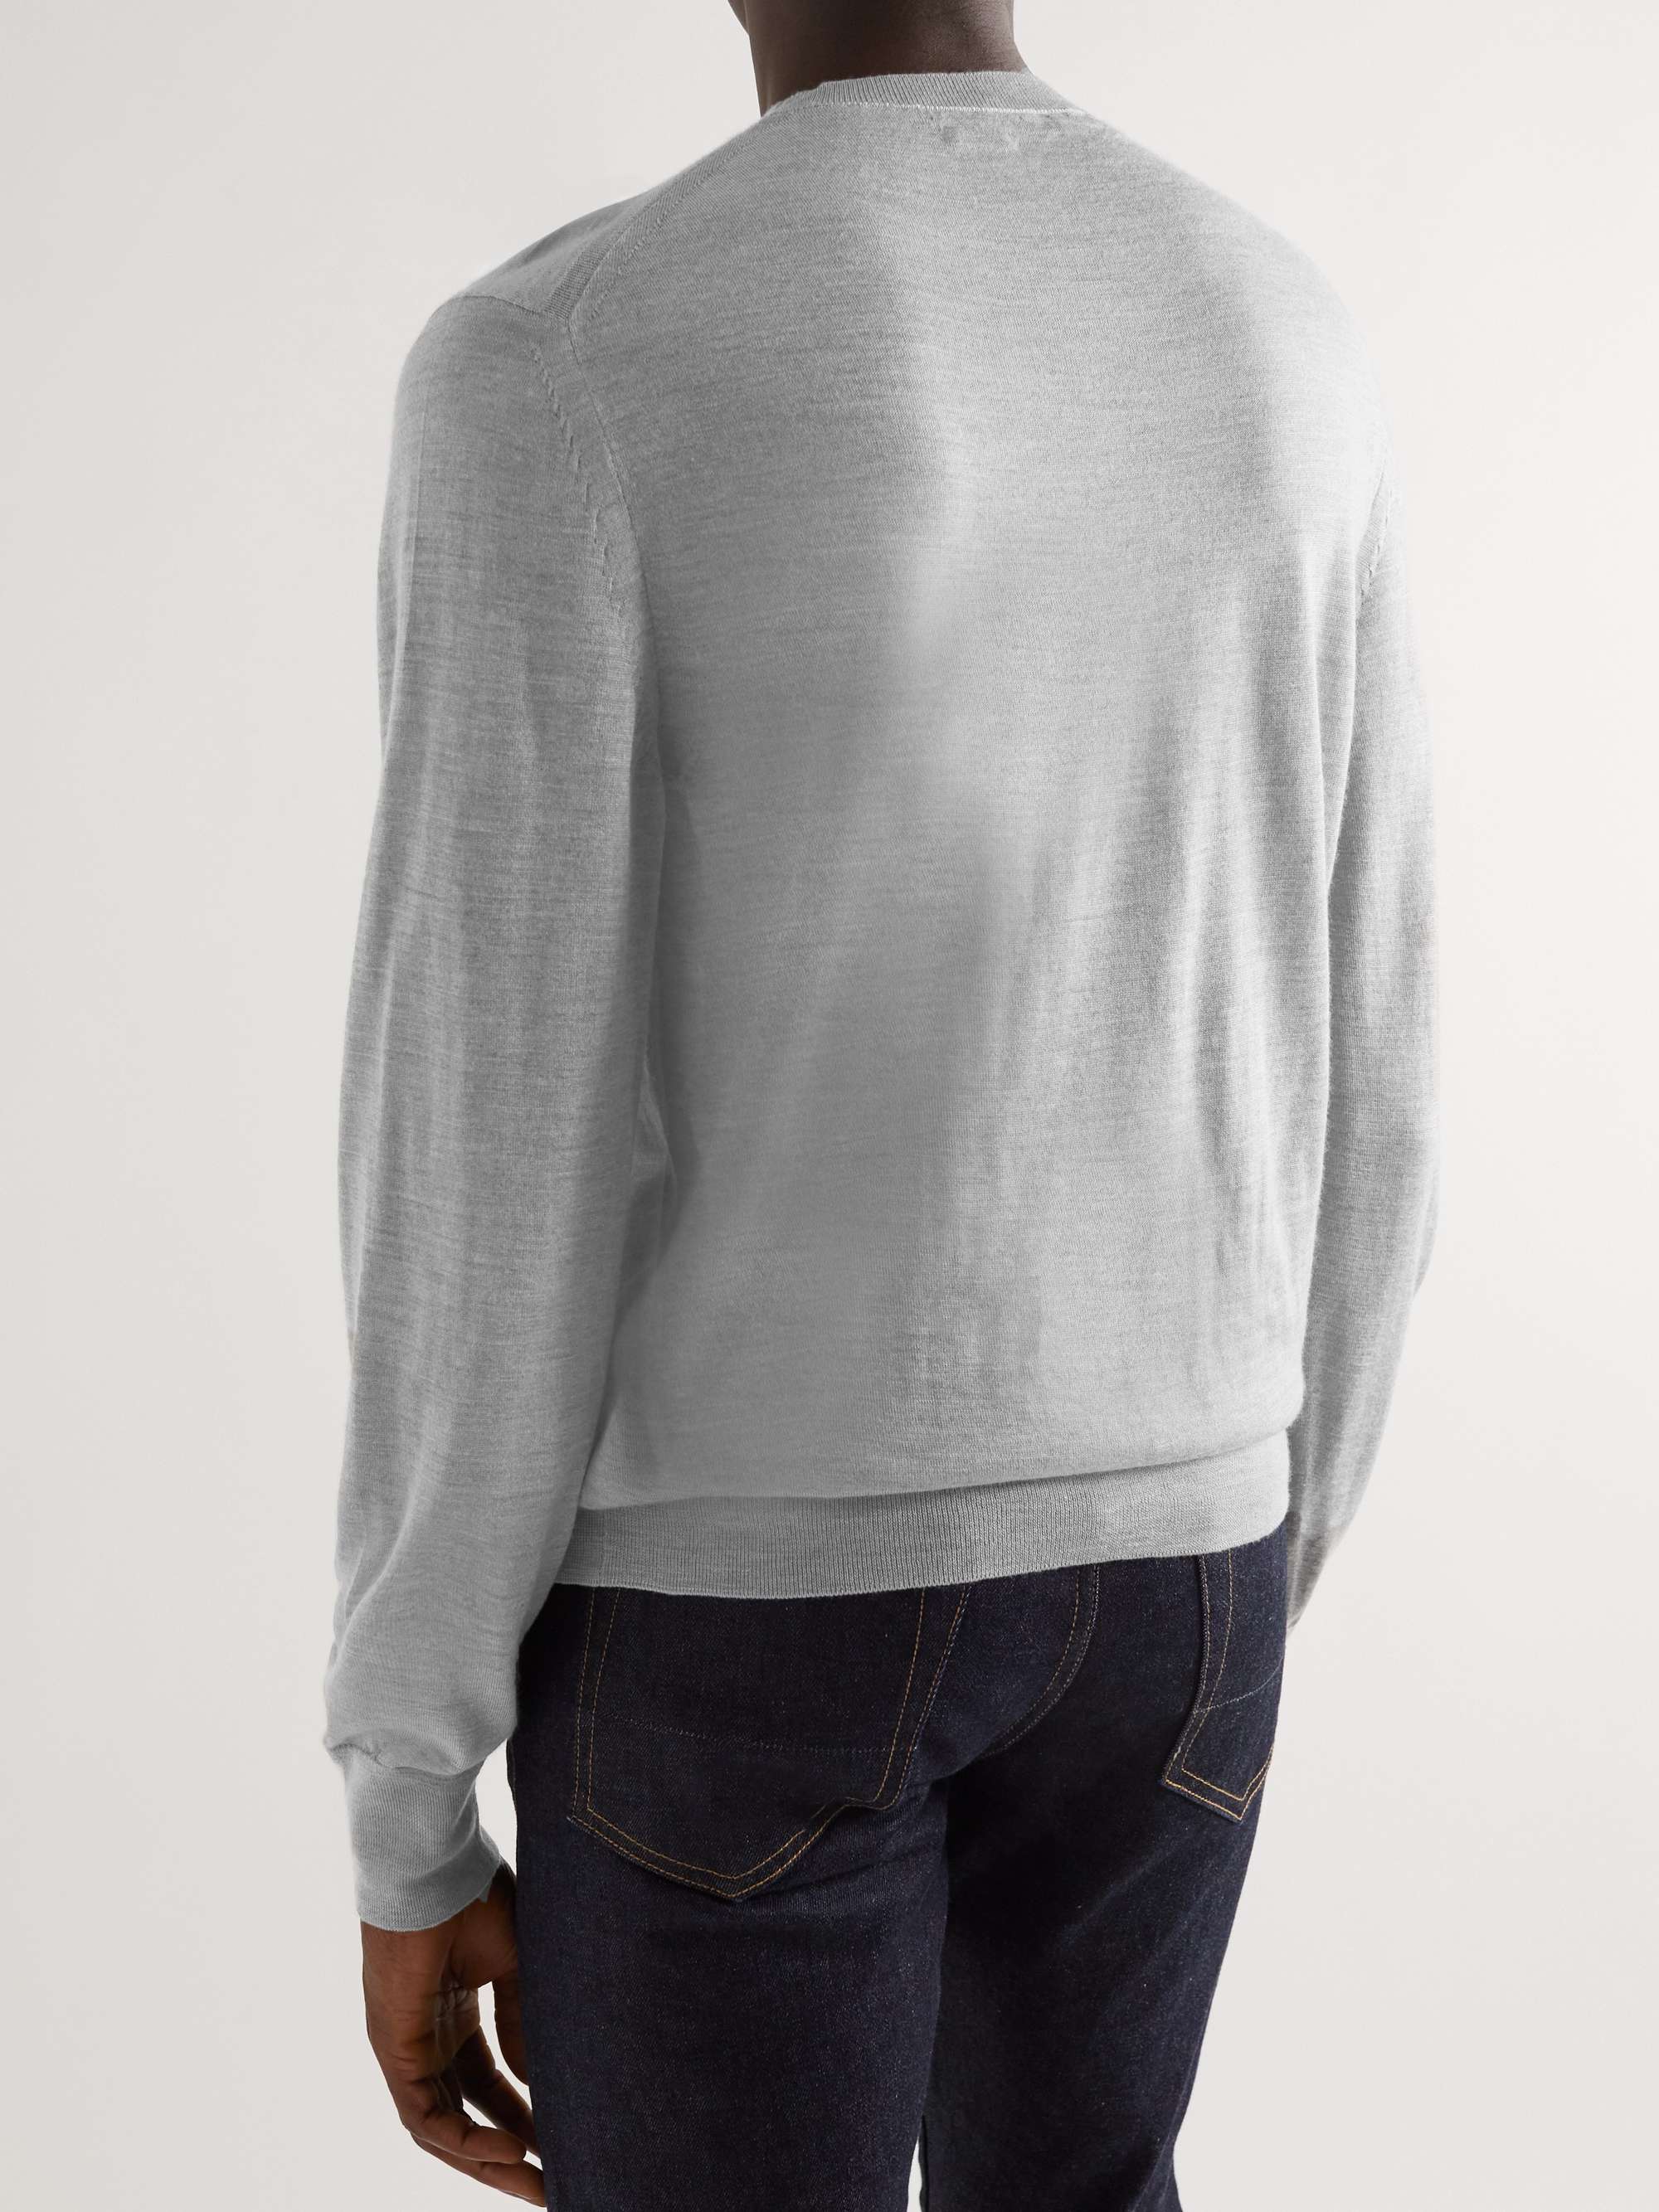 TOM FORD Cashmere and Silk-Blend Sweater